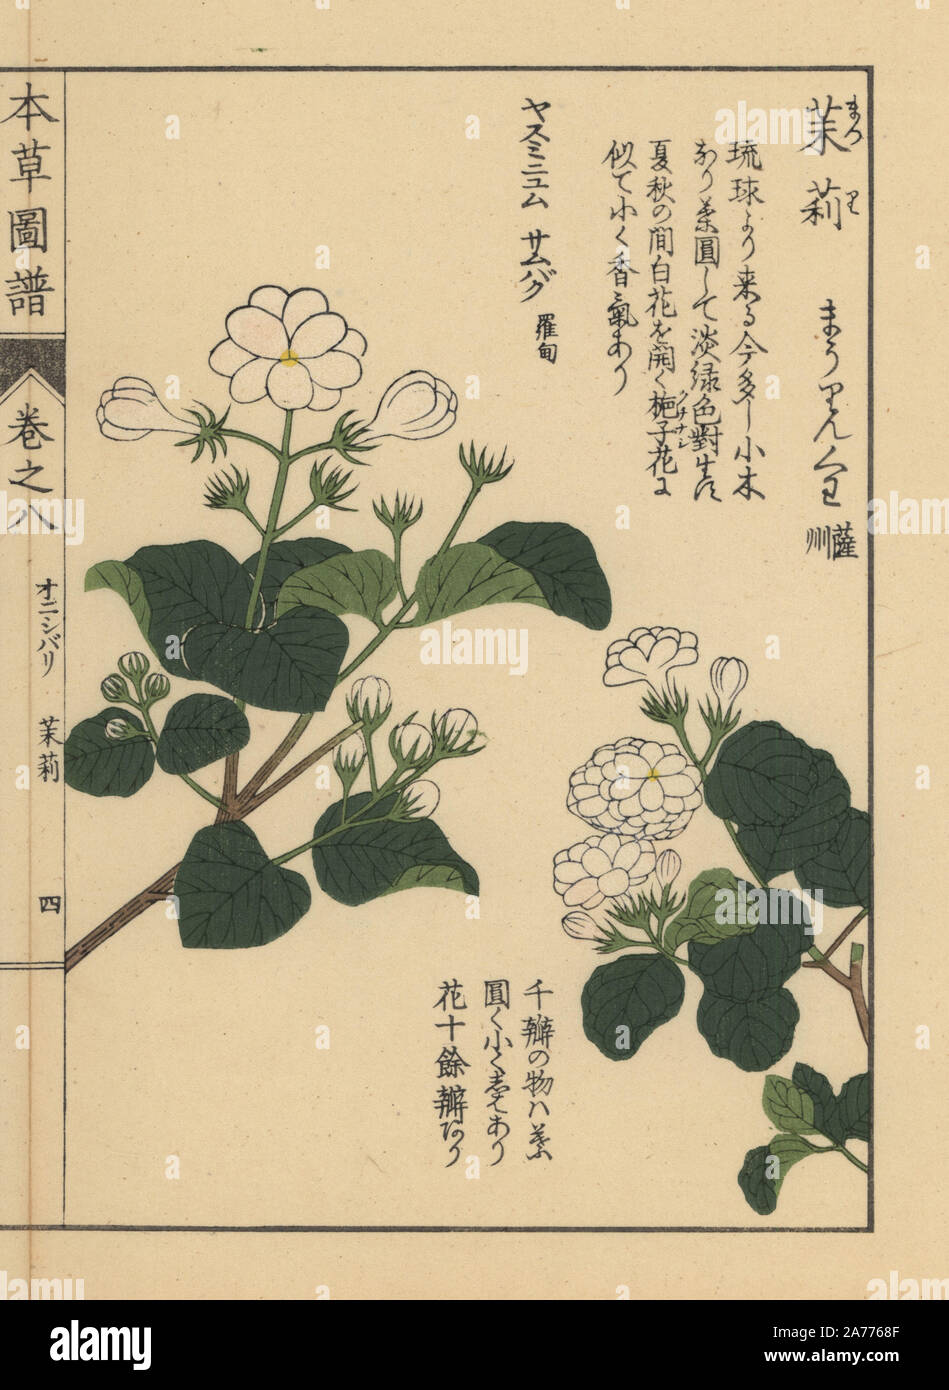 Arabian jasmine, Jasminum sambac Ait. and Tuscan jasmine, Jasminum sambac Ait. flore pleno. Colour-printed woodblock engraving by Kan'en Iwasaki from 'Honzo Zufu,' an Illustrated Guide to Medicinal Plants, Japan, 1884. Iwasaki (1786-1842) was a Japanese botanist, entomologist and zoologist. He was one of the first Japanese botanists to incorporate western knowledge into his studies. Stock Photo